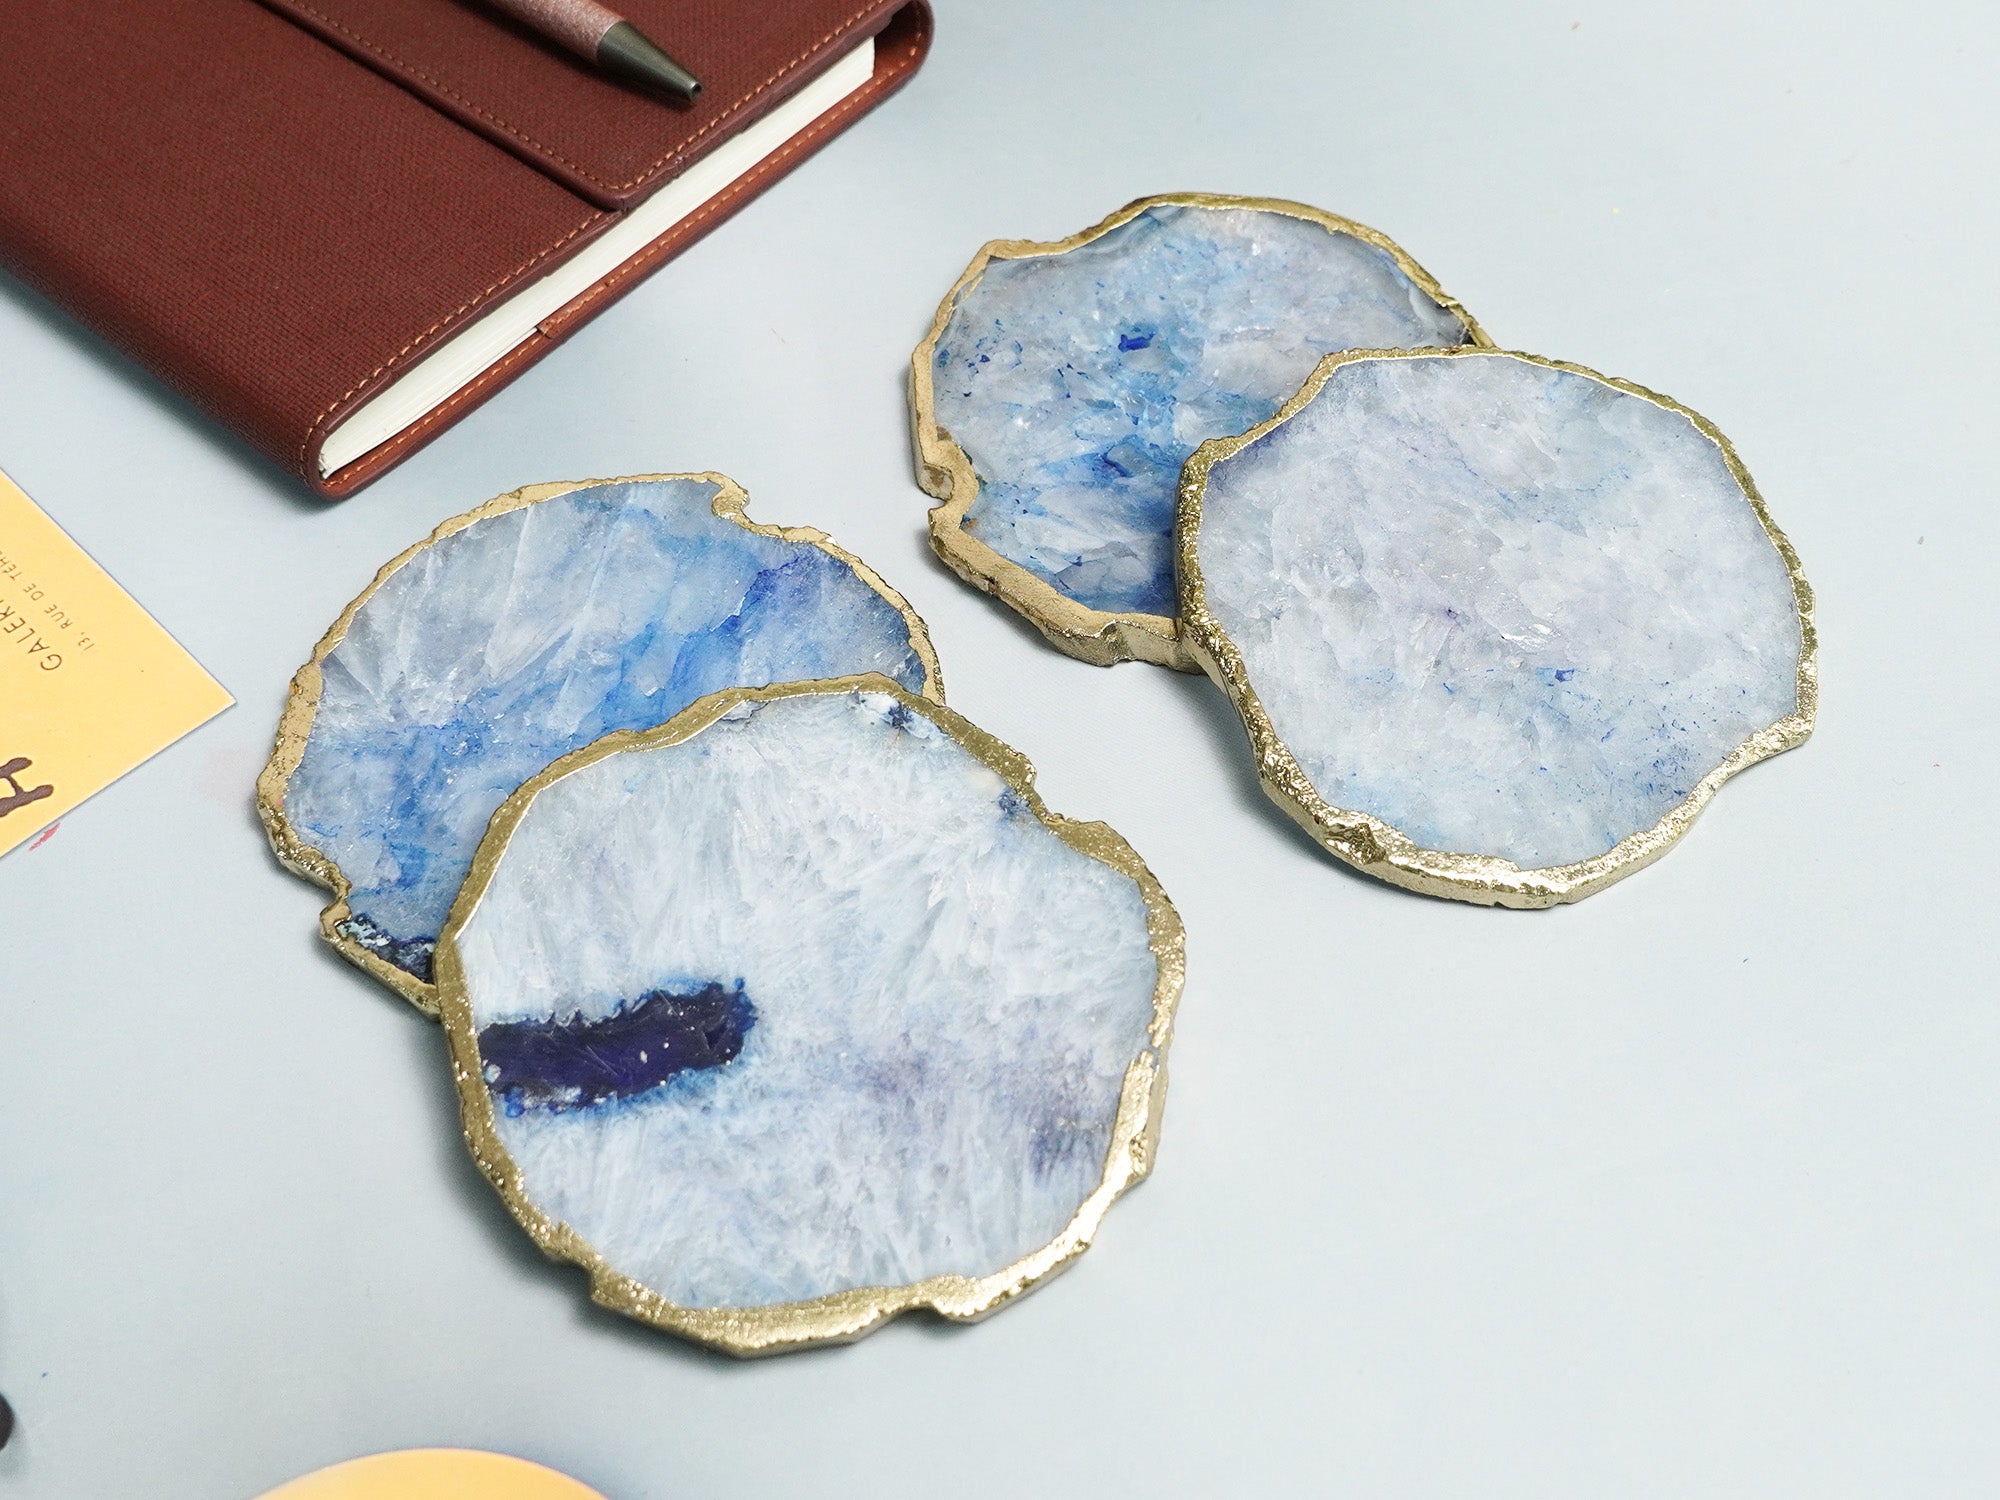 CAMEROON BIBELOT Agate Handcrafted Luxury Gold plated Coaster (Natural, Frozen Blue)